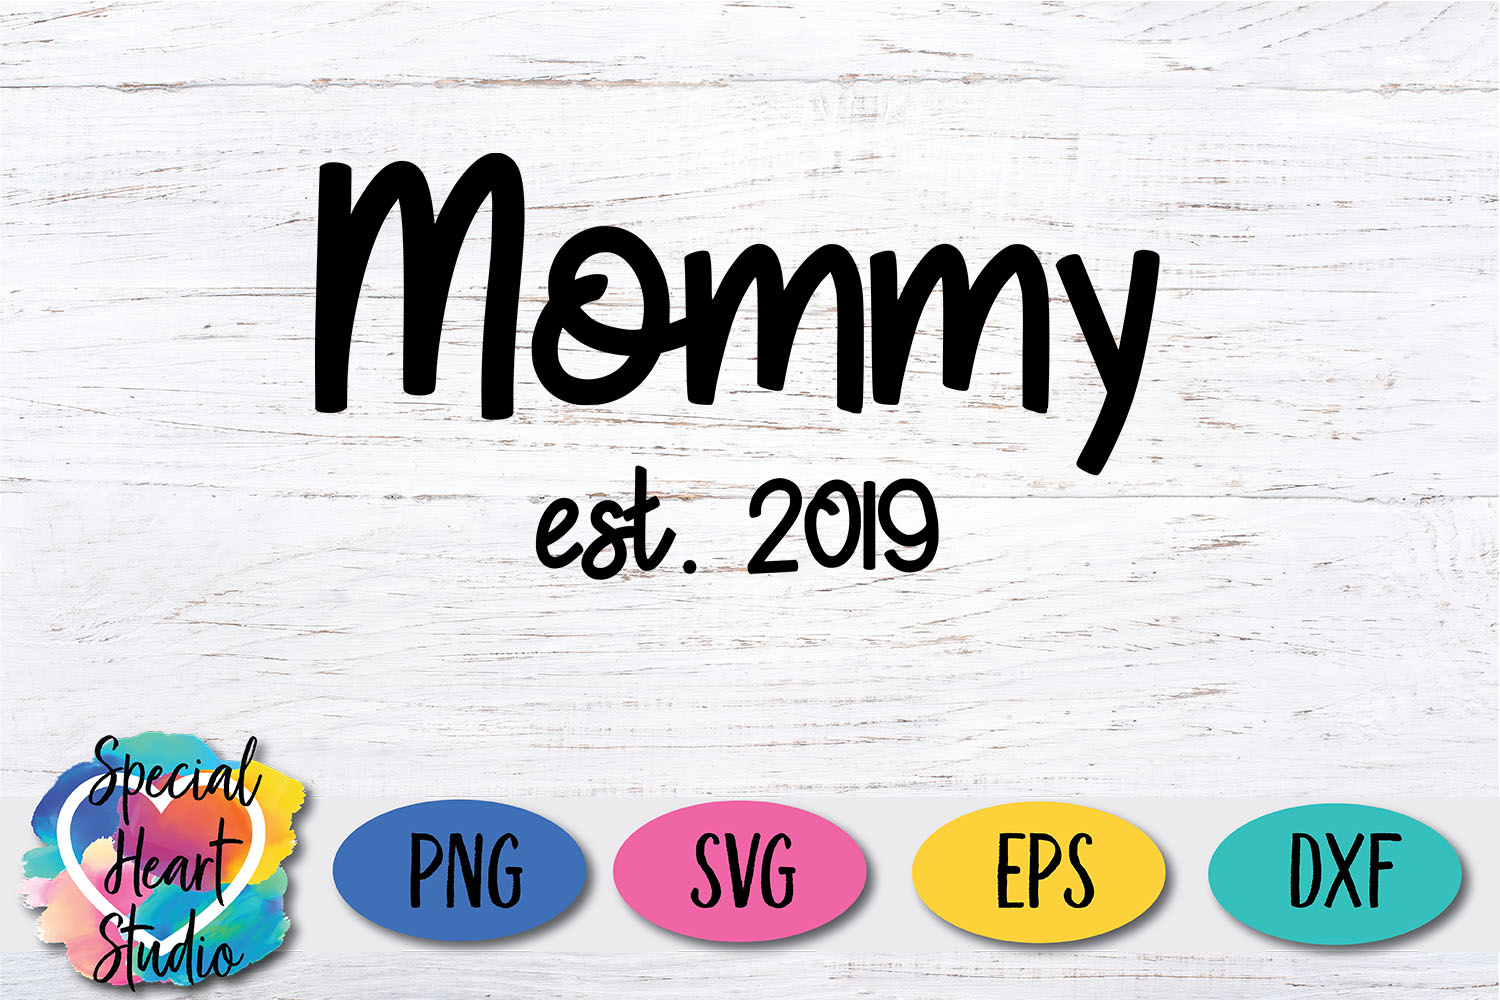 Download Mommy est 2019 - SVG files include years 2000-2020